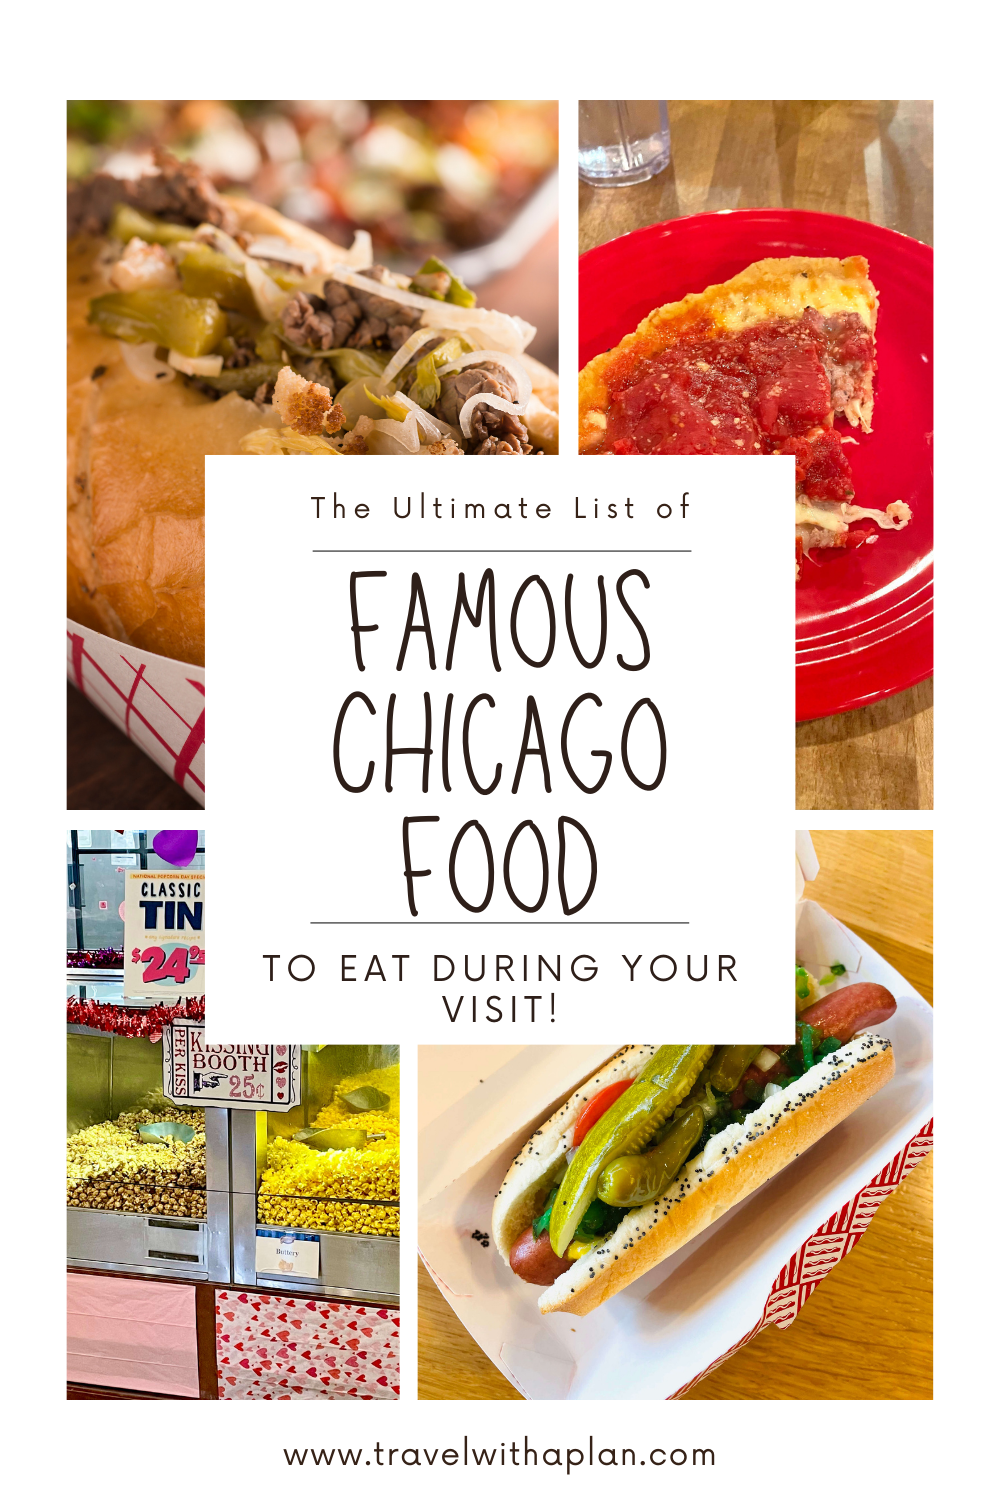 Find out the famous Chicago food that you don't want to miss when visiting there - from top US family travel blog, Travel With A Plan!